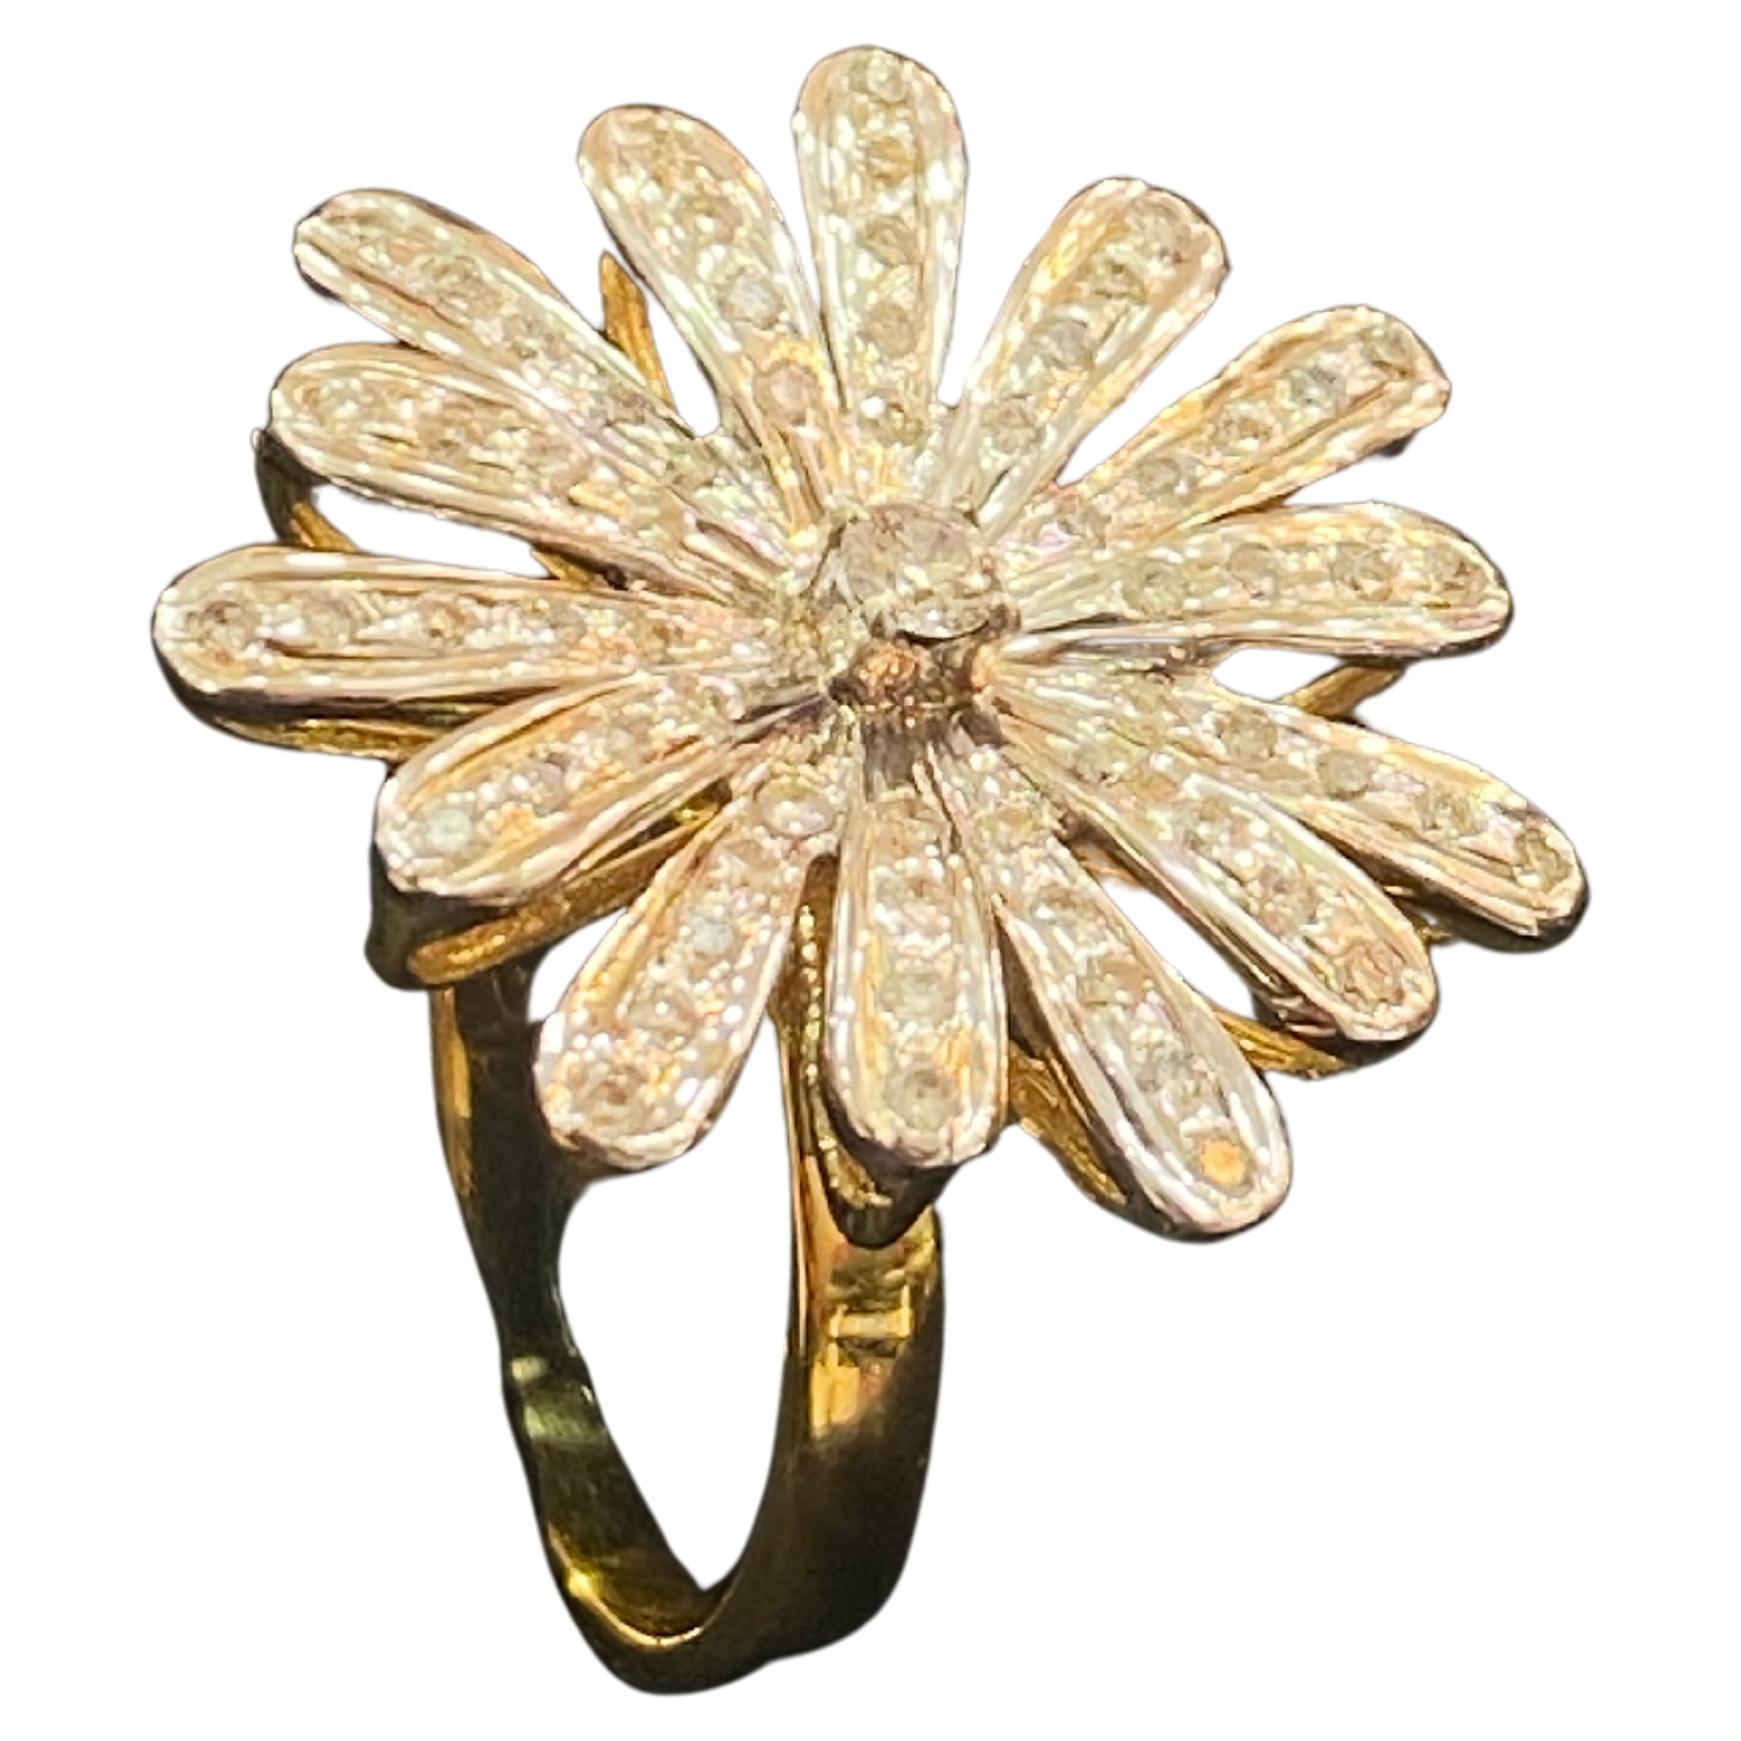 Stunning 0.80 Cts F/VS1 Round Brilliant Cut Natural Diamonds Daisy Ring 14K Gold For Sale